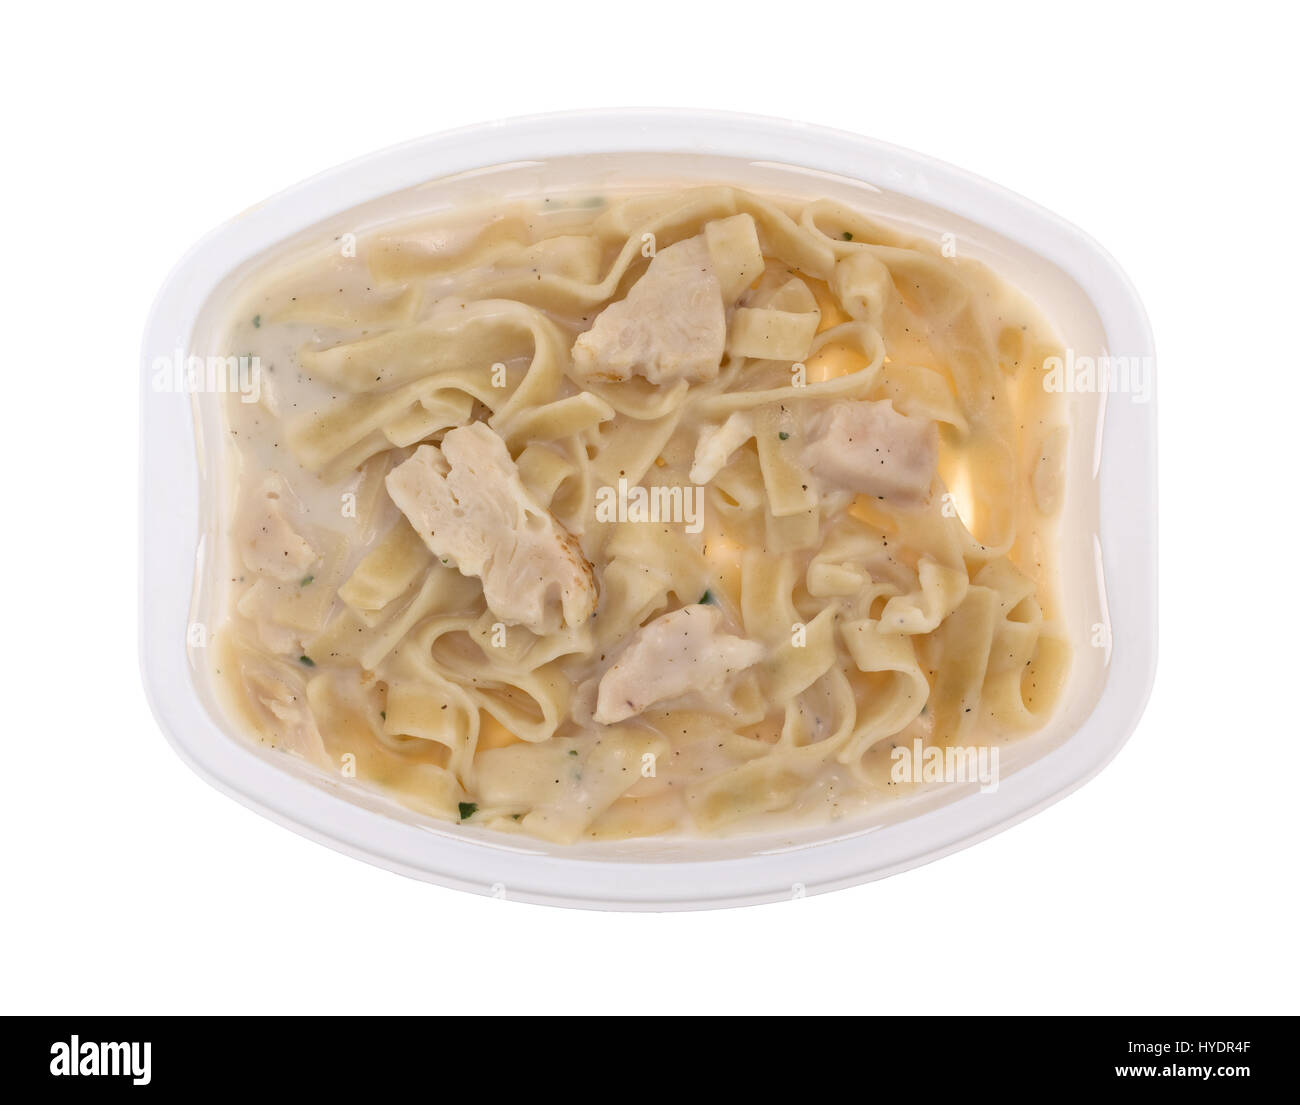 Top view of a cooked TV dinner of fettuccini with chicken and seasonings in a plastic tray isolated on a white background. Stock Photo